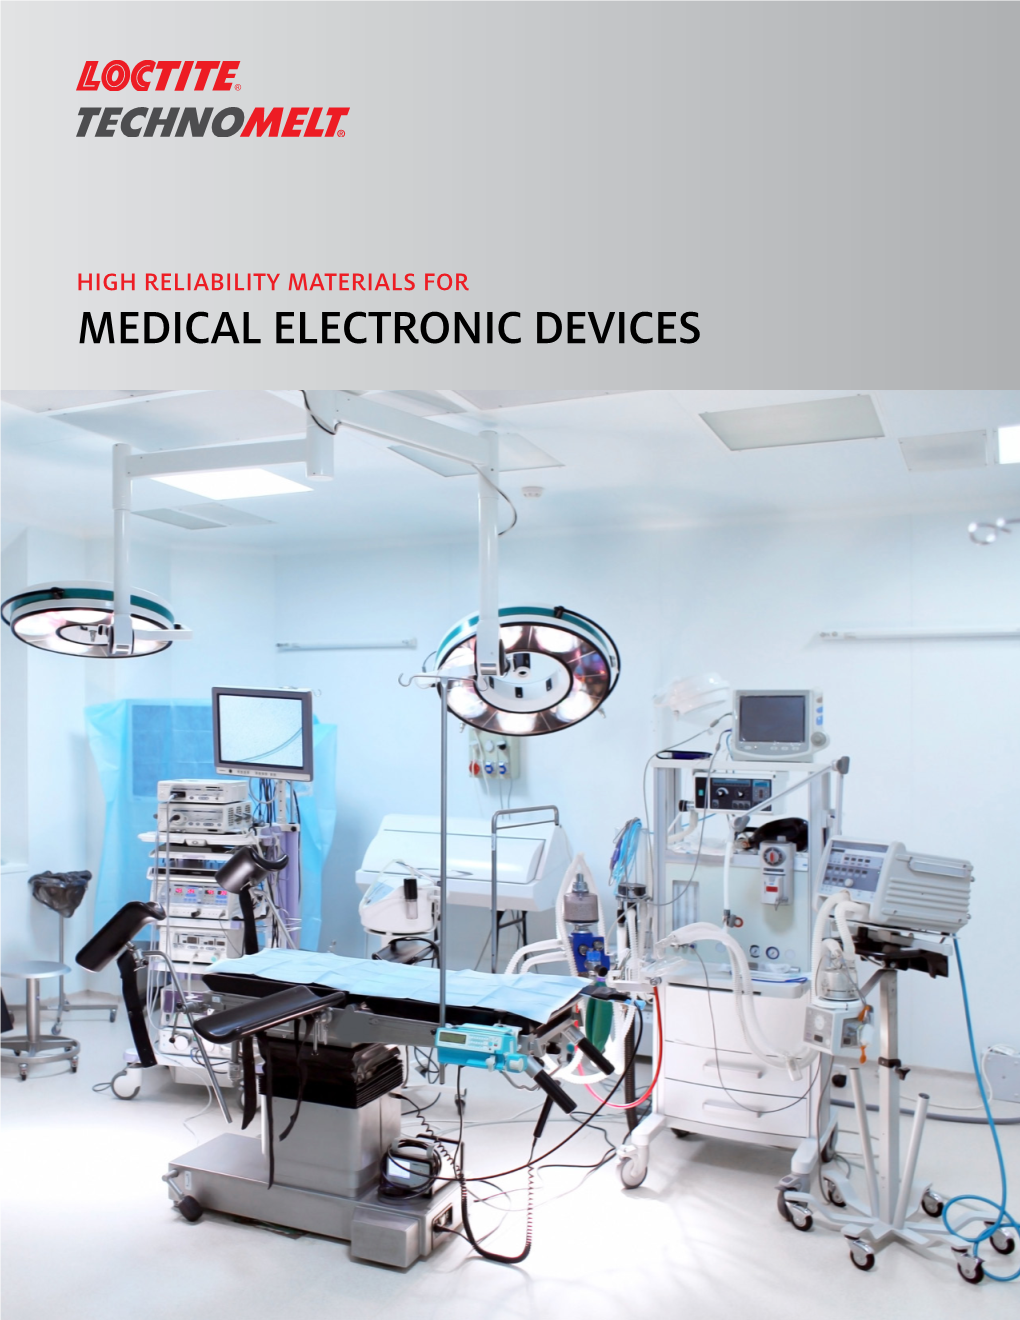 High Reliability Materials for Medical Electronic Devices